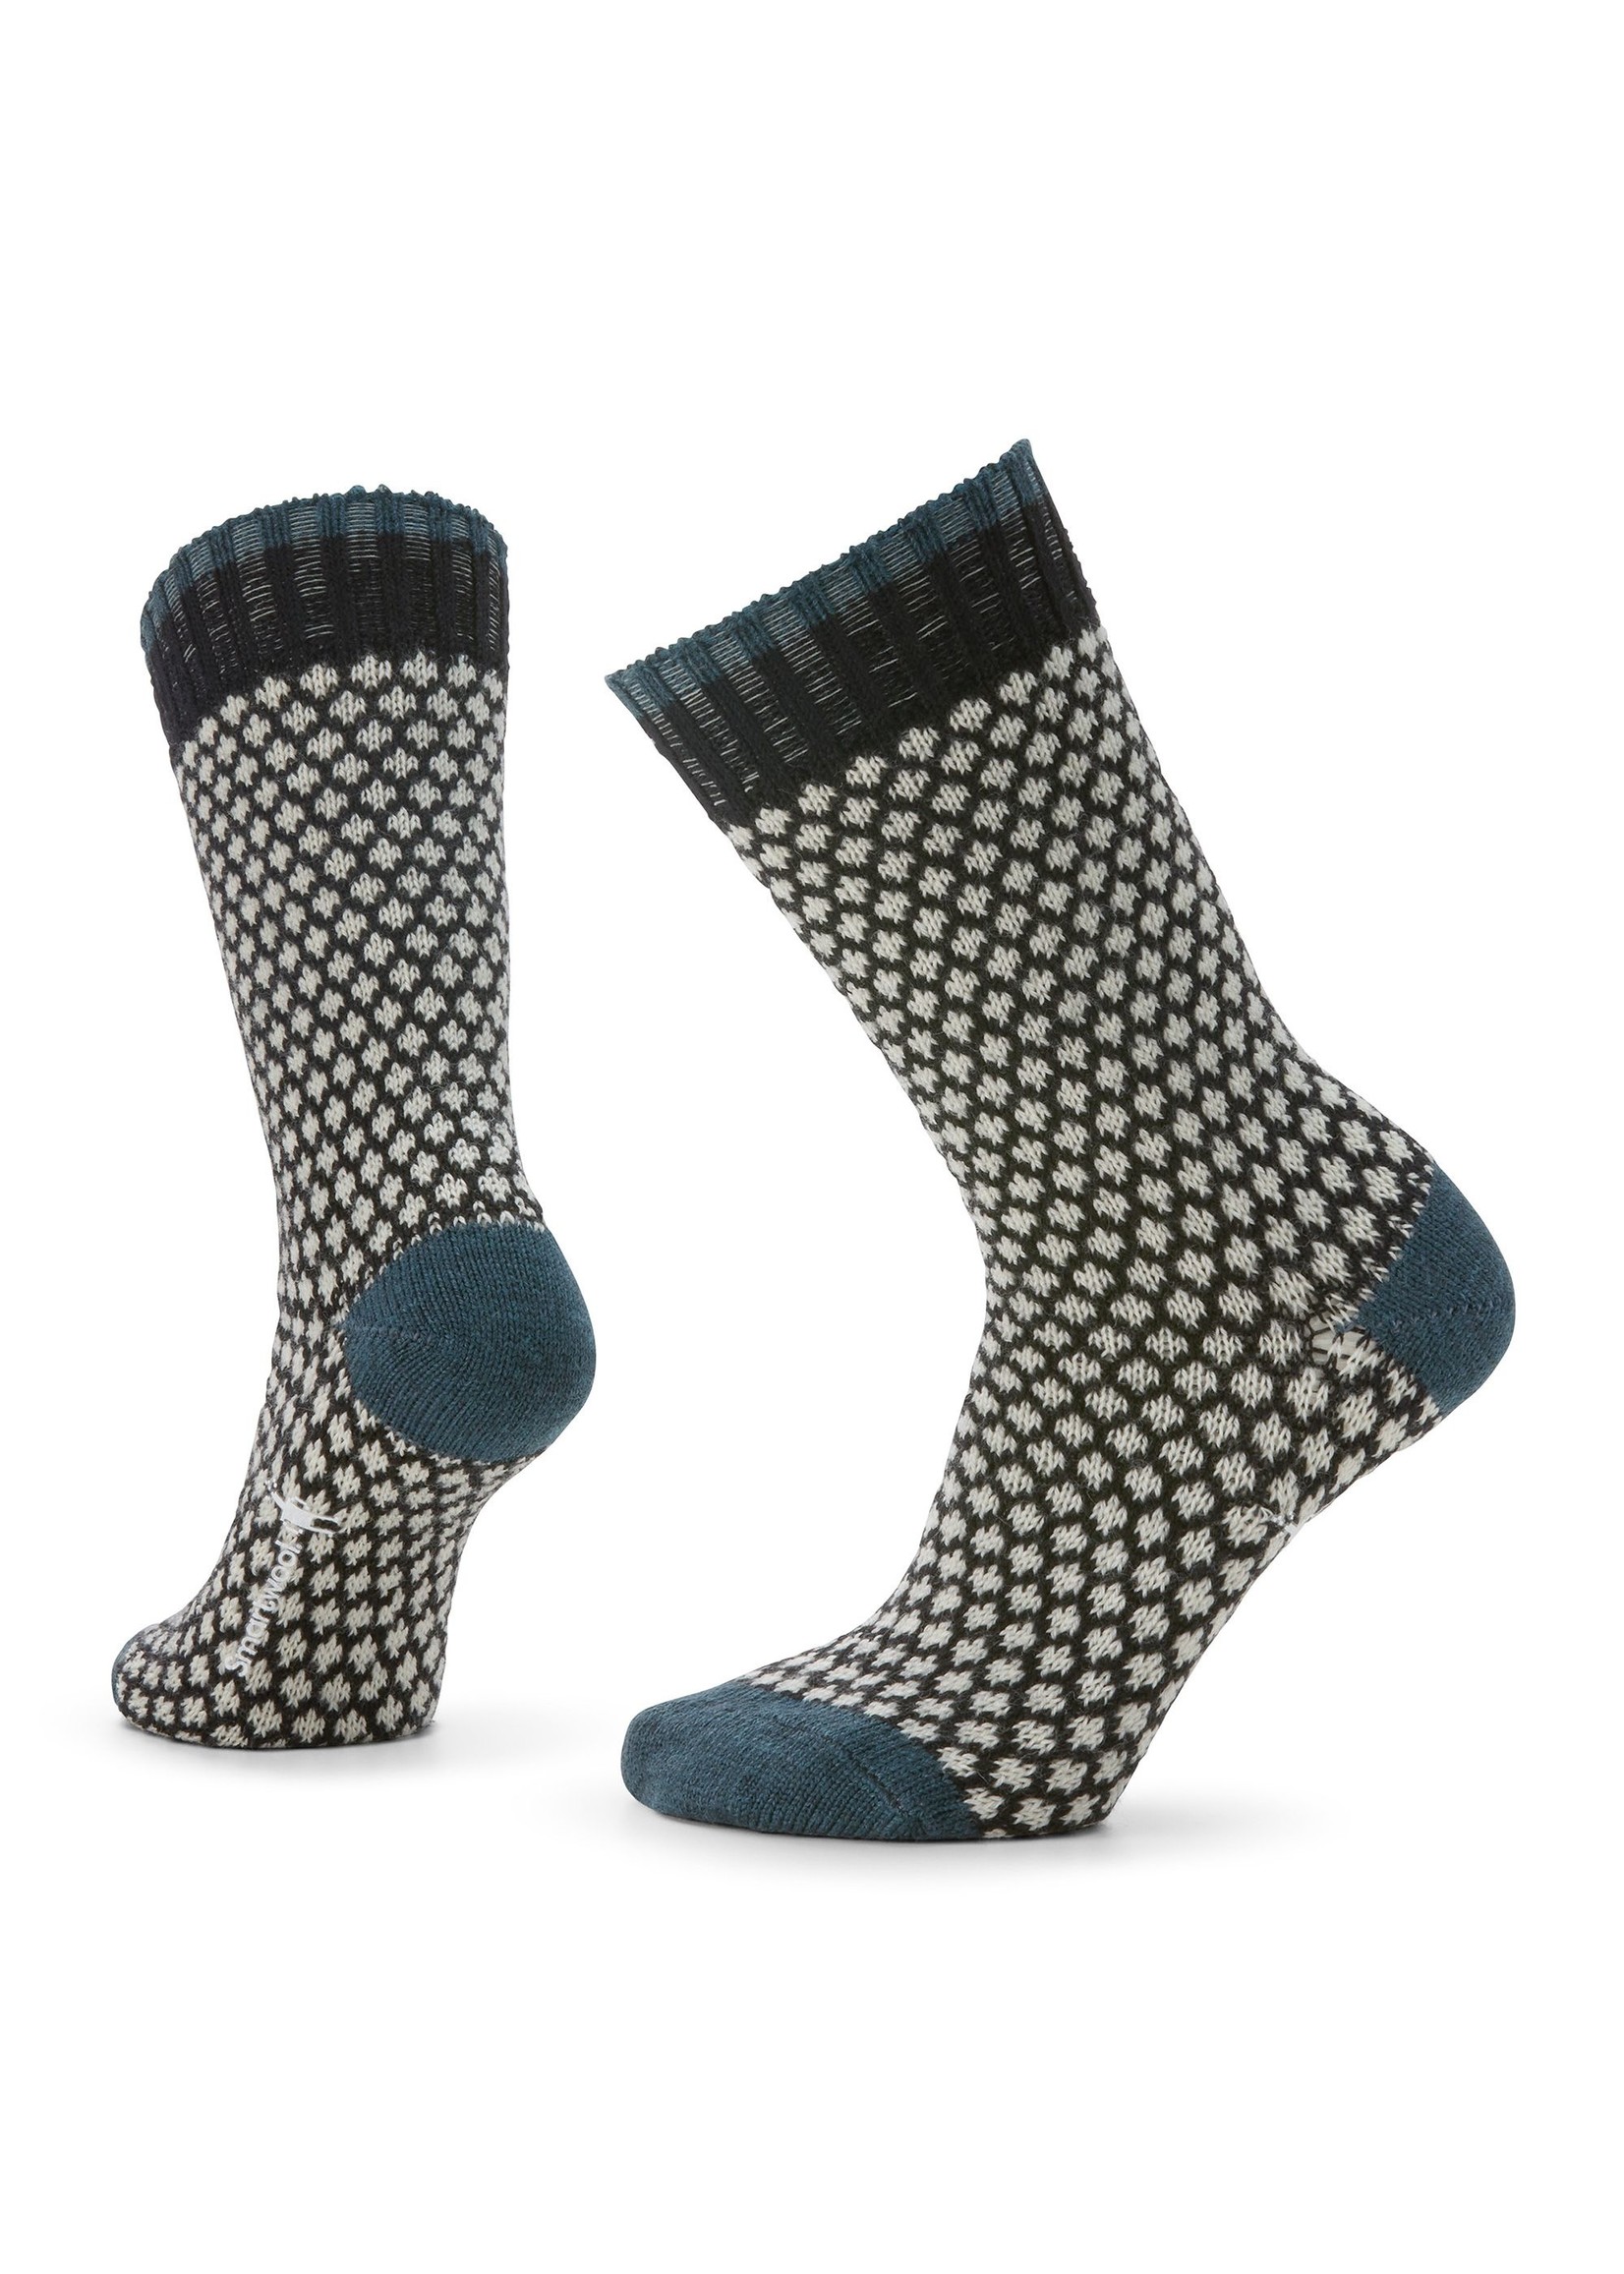 SMARTWOOL Chaussettes redessinées Popcorn Cable Dot-Femme